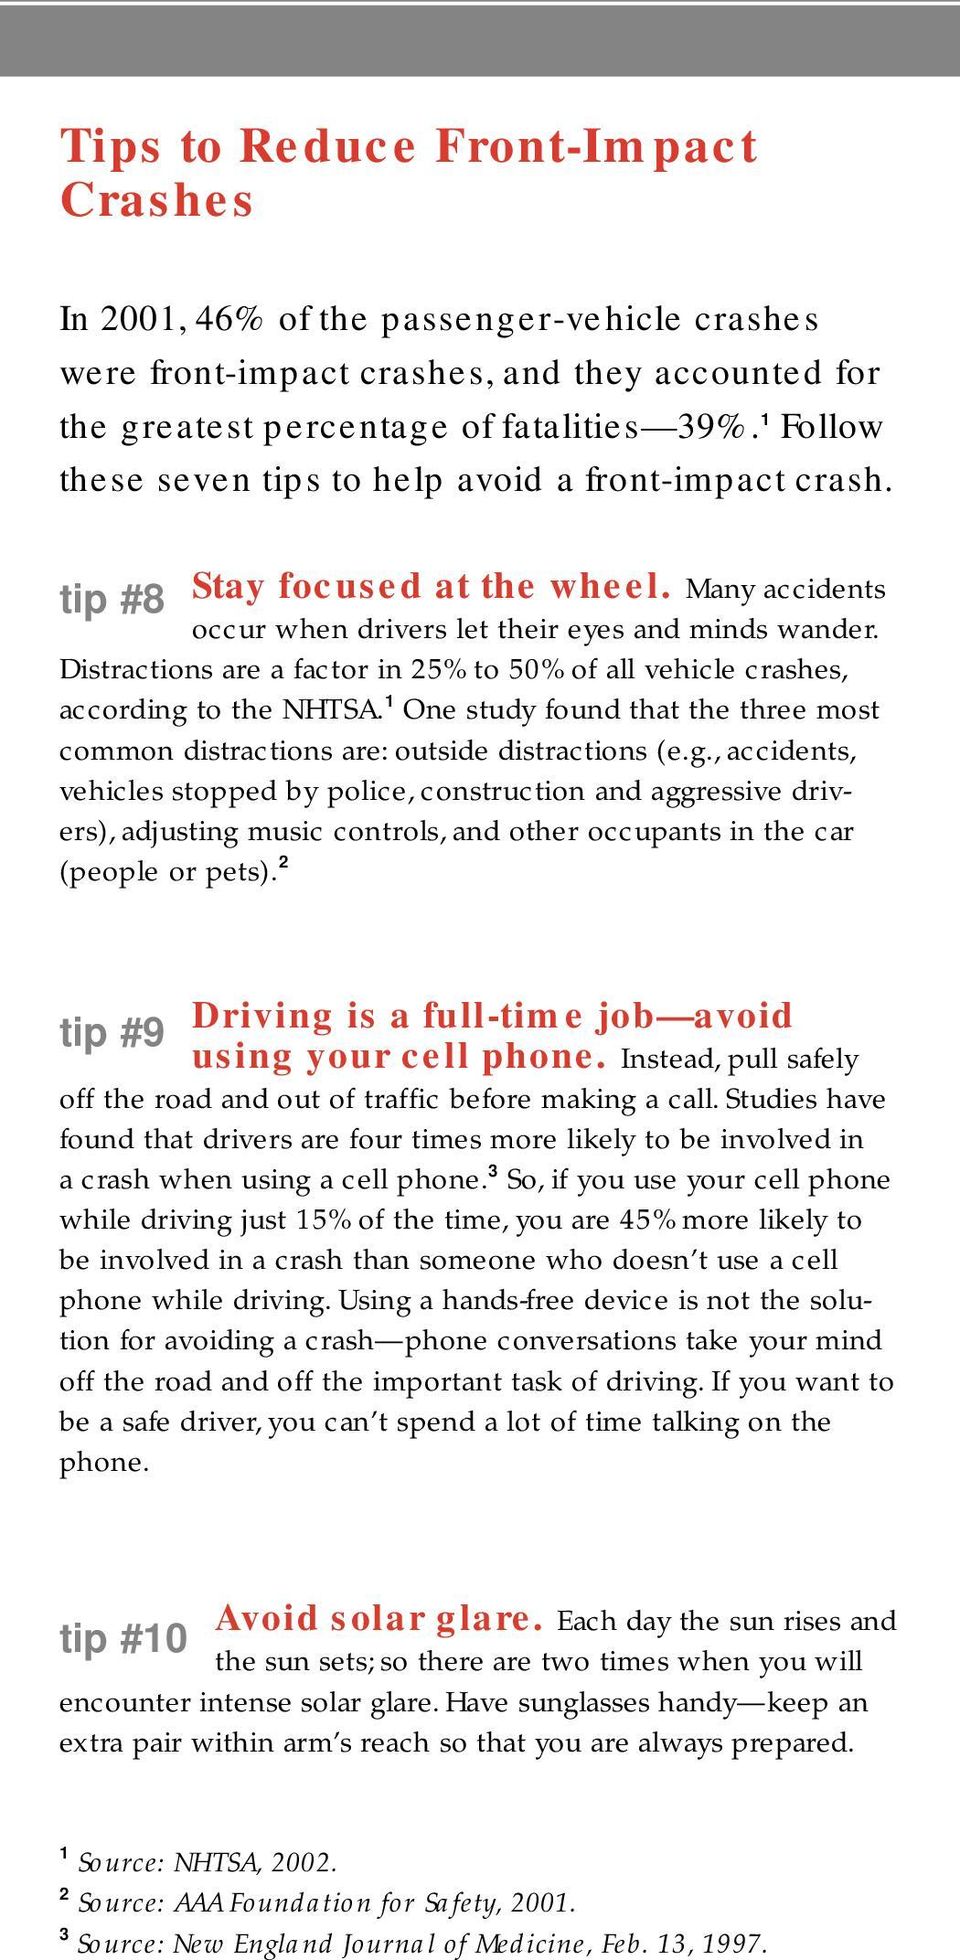 Distractions are a factor in 25% to 50% of all vehicle crashes, according 